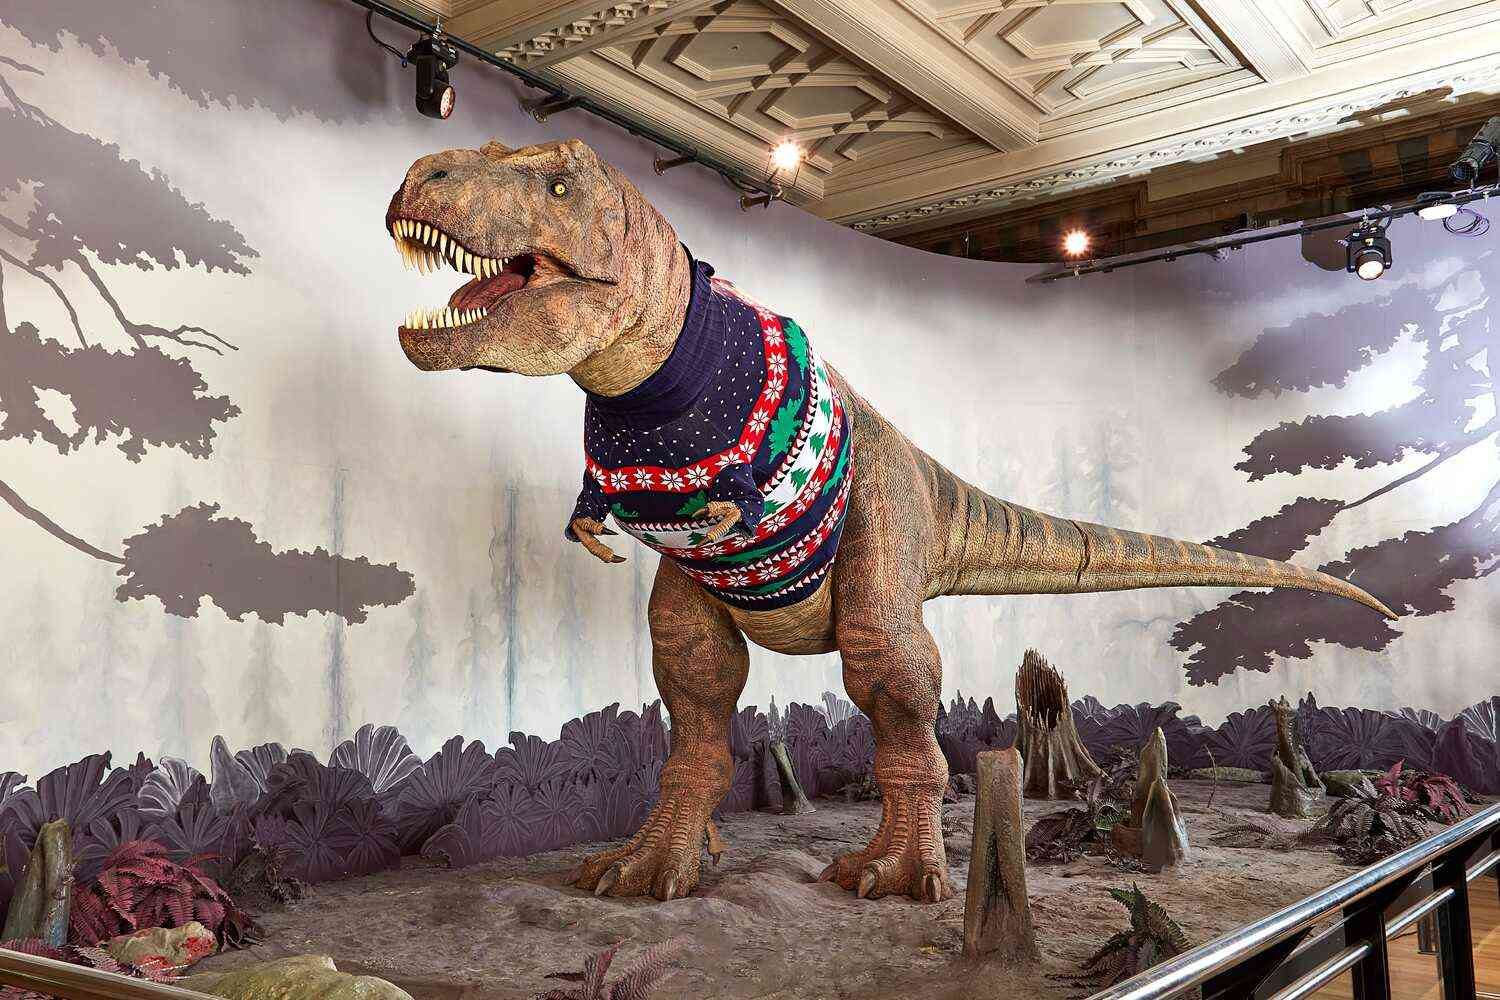 Why the T. Rex's face is like Santa Claus